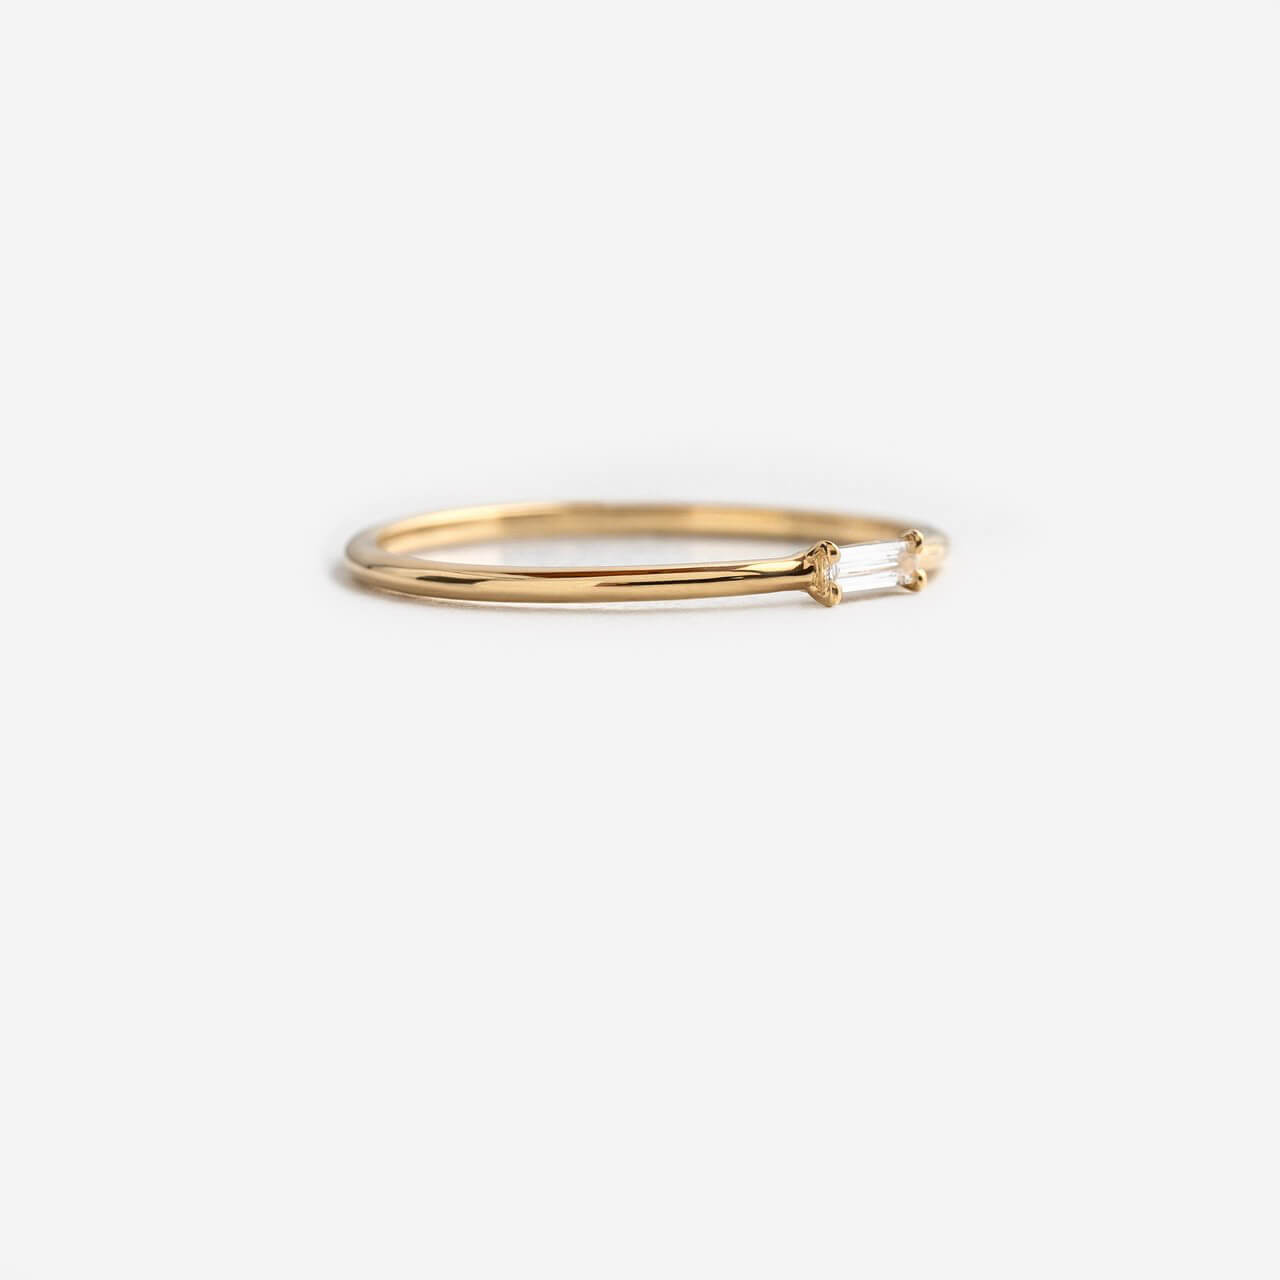 Morse Code Ring, Yellow Gold - Letter "T"